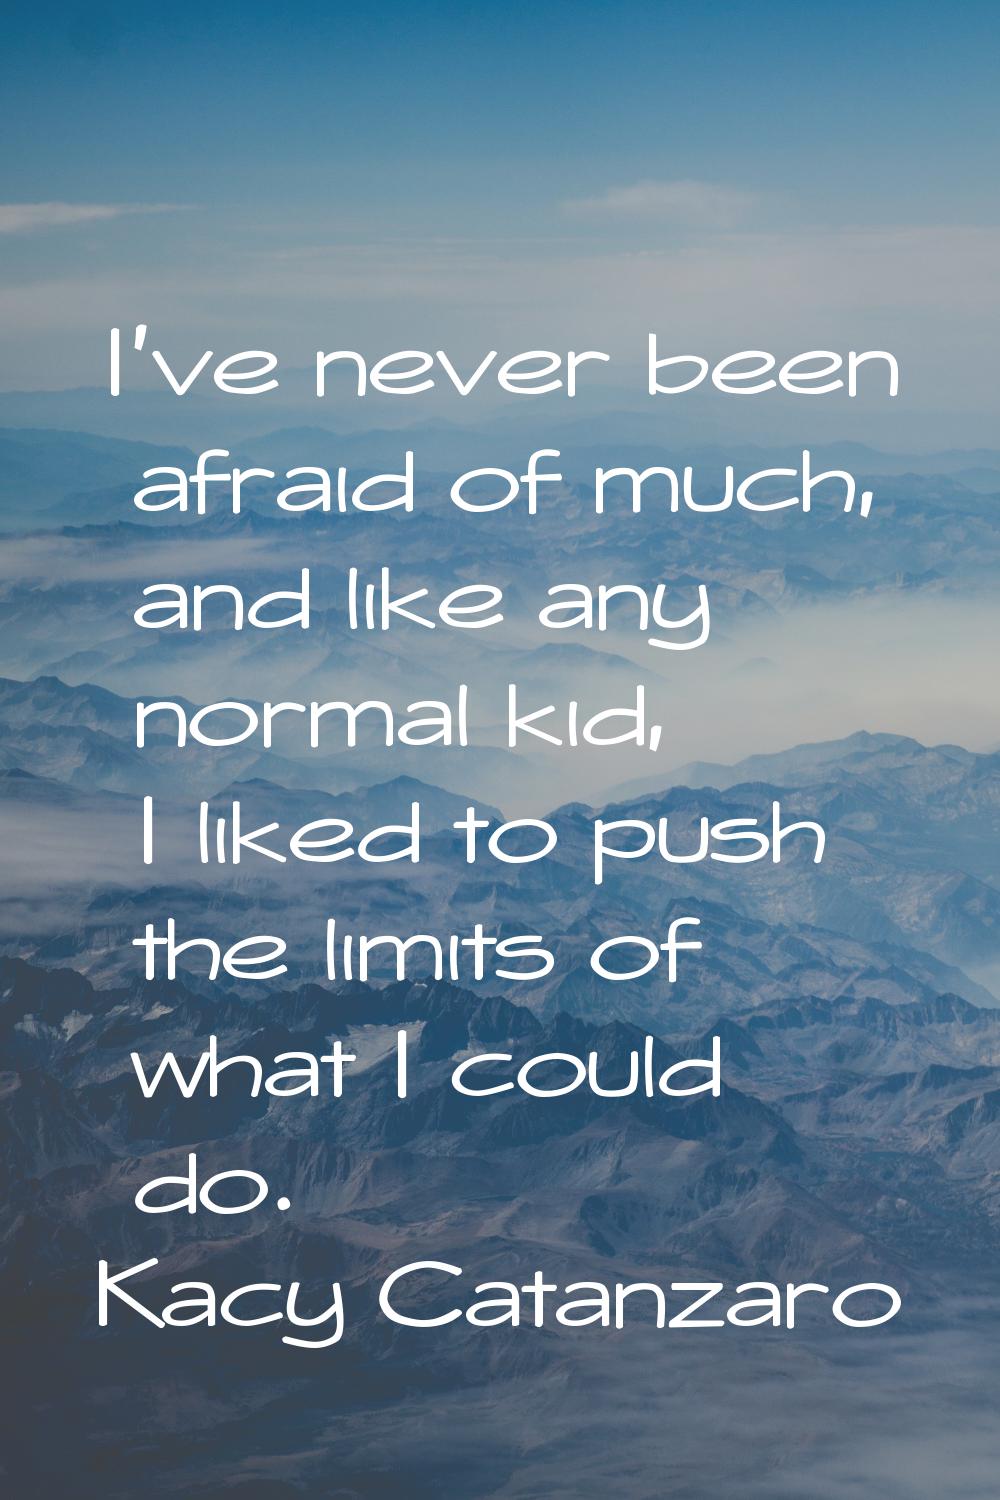 I've never been afraid of much, and like any normal kid, I liked to push the limits of what I could